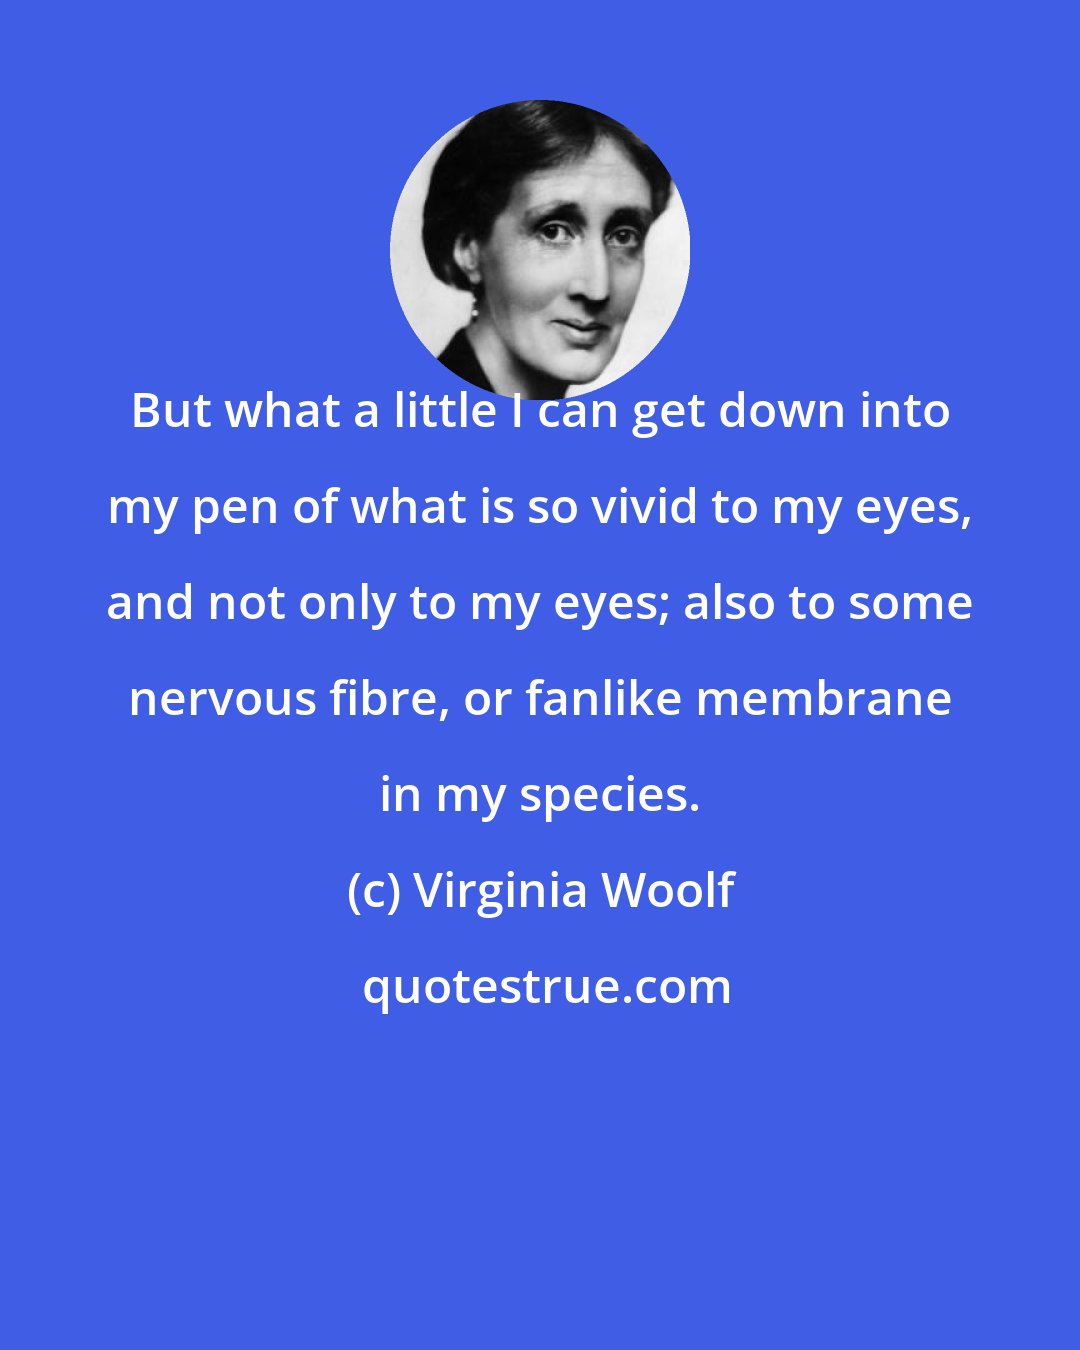 Virginia Woolf: But what a little I can get down into my pen of what is so vivid to my eyes, and not only to my eyes; also to some nervous fibre, or fanlike membrane in my species.